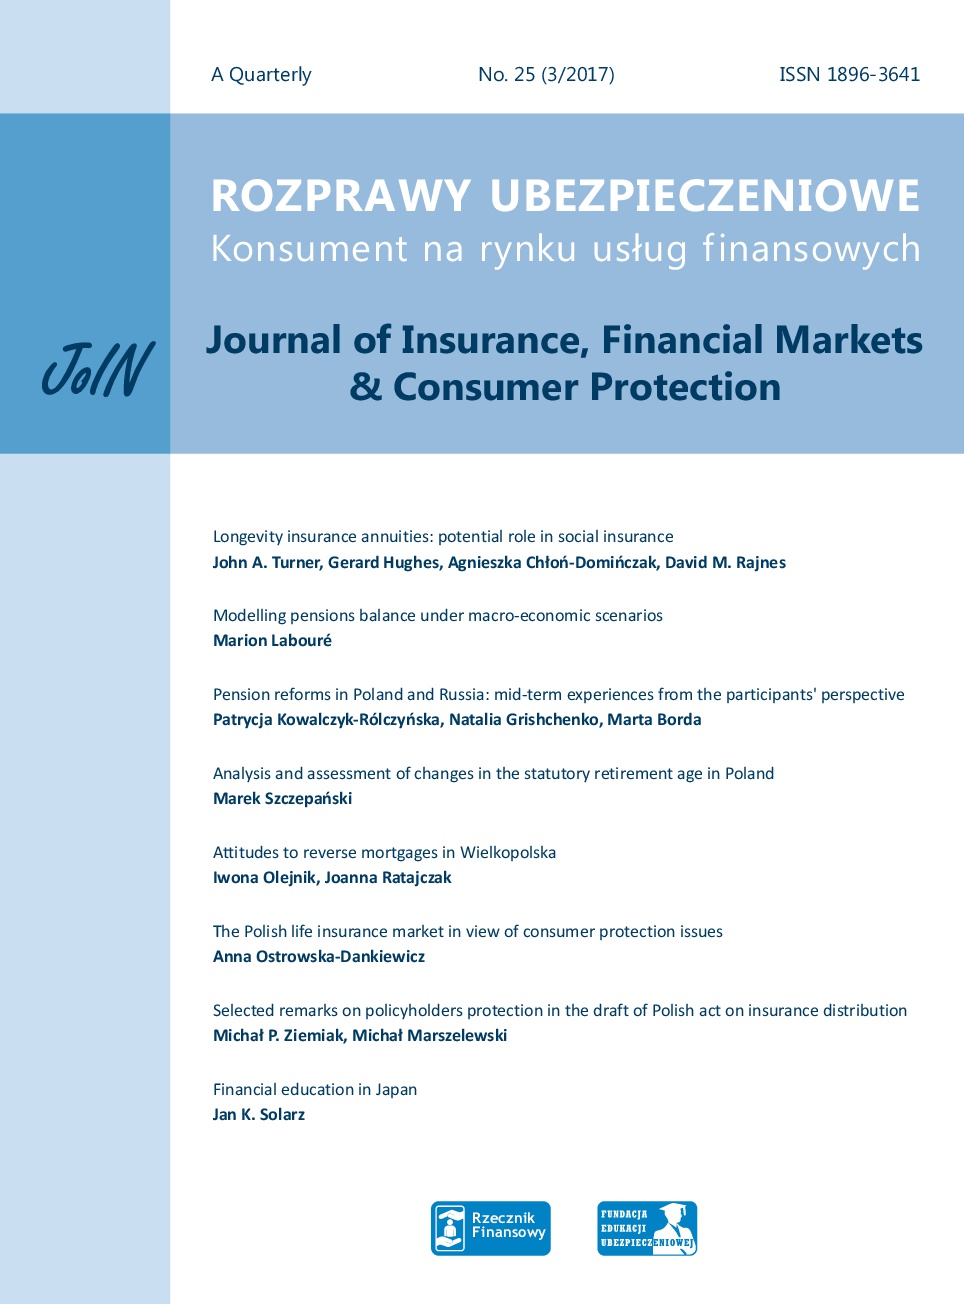 Analysis and assessment of changes in the statutory retirement age in Poland